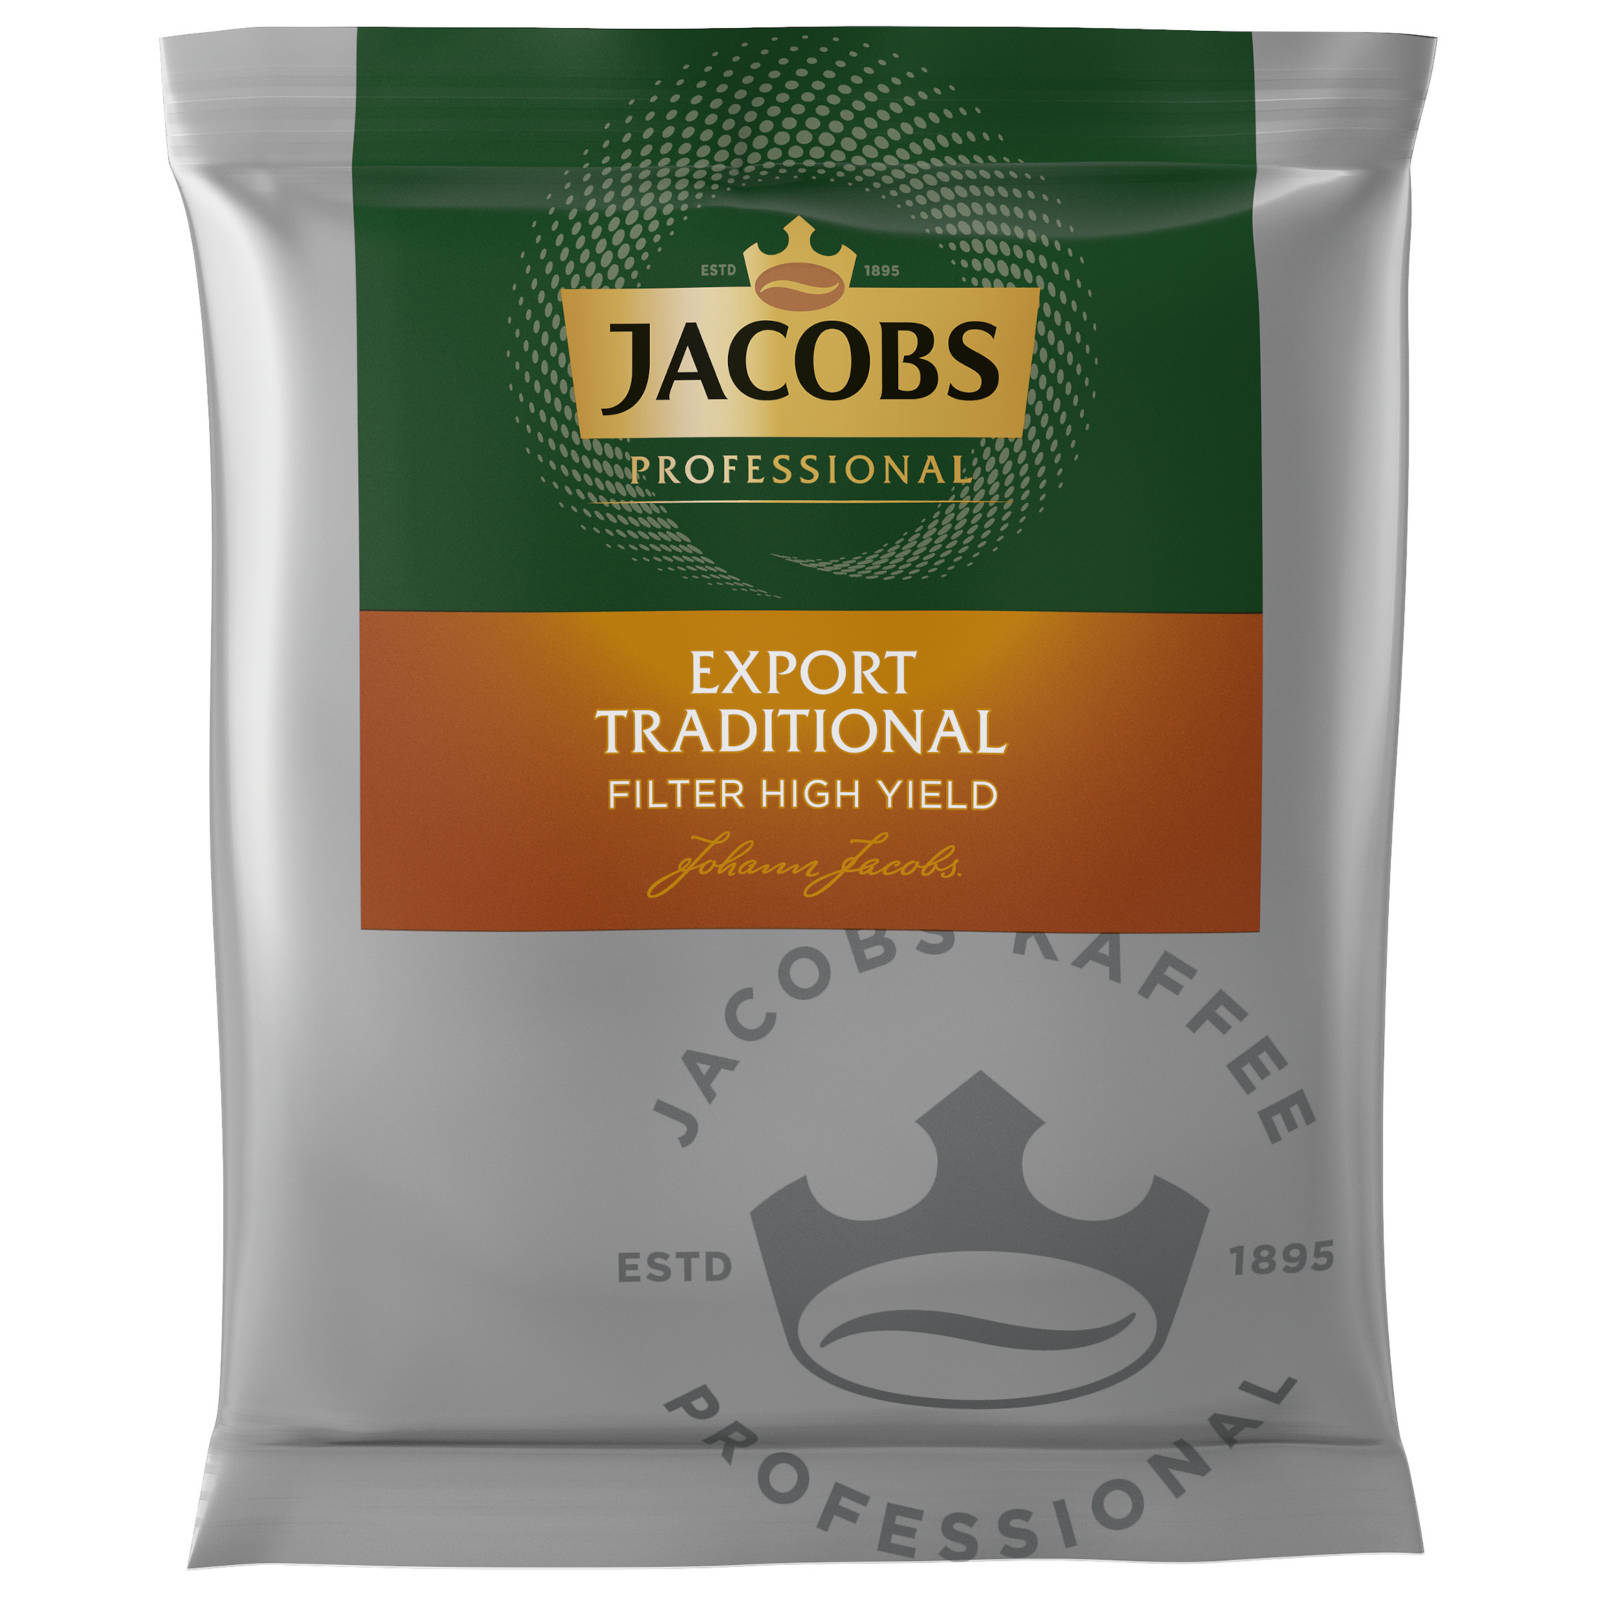 Press) HY Export JACOBS French (Filter, JACOBS Traditional Filterkaffee Professional